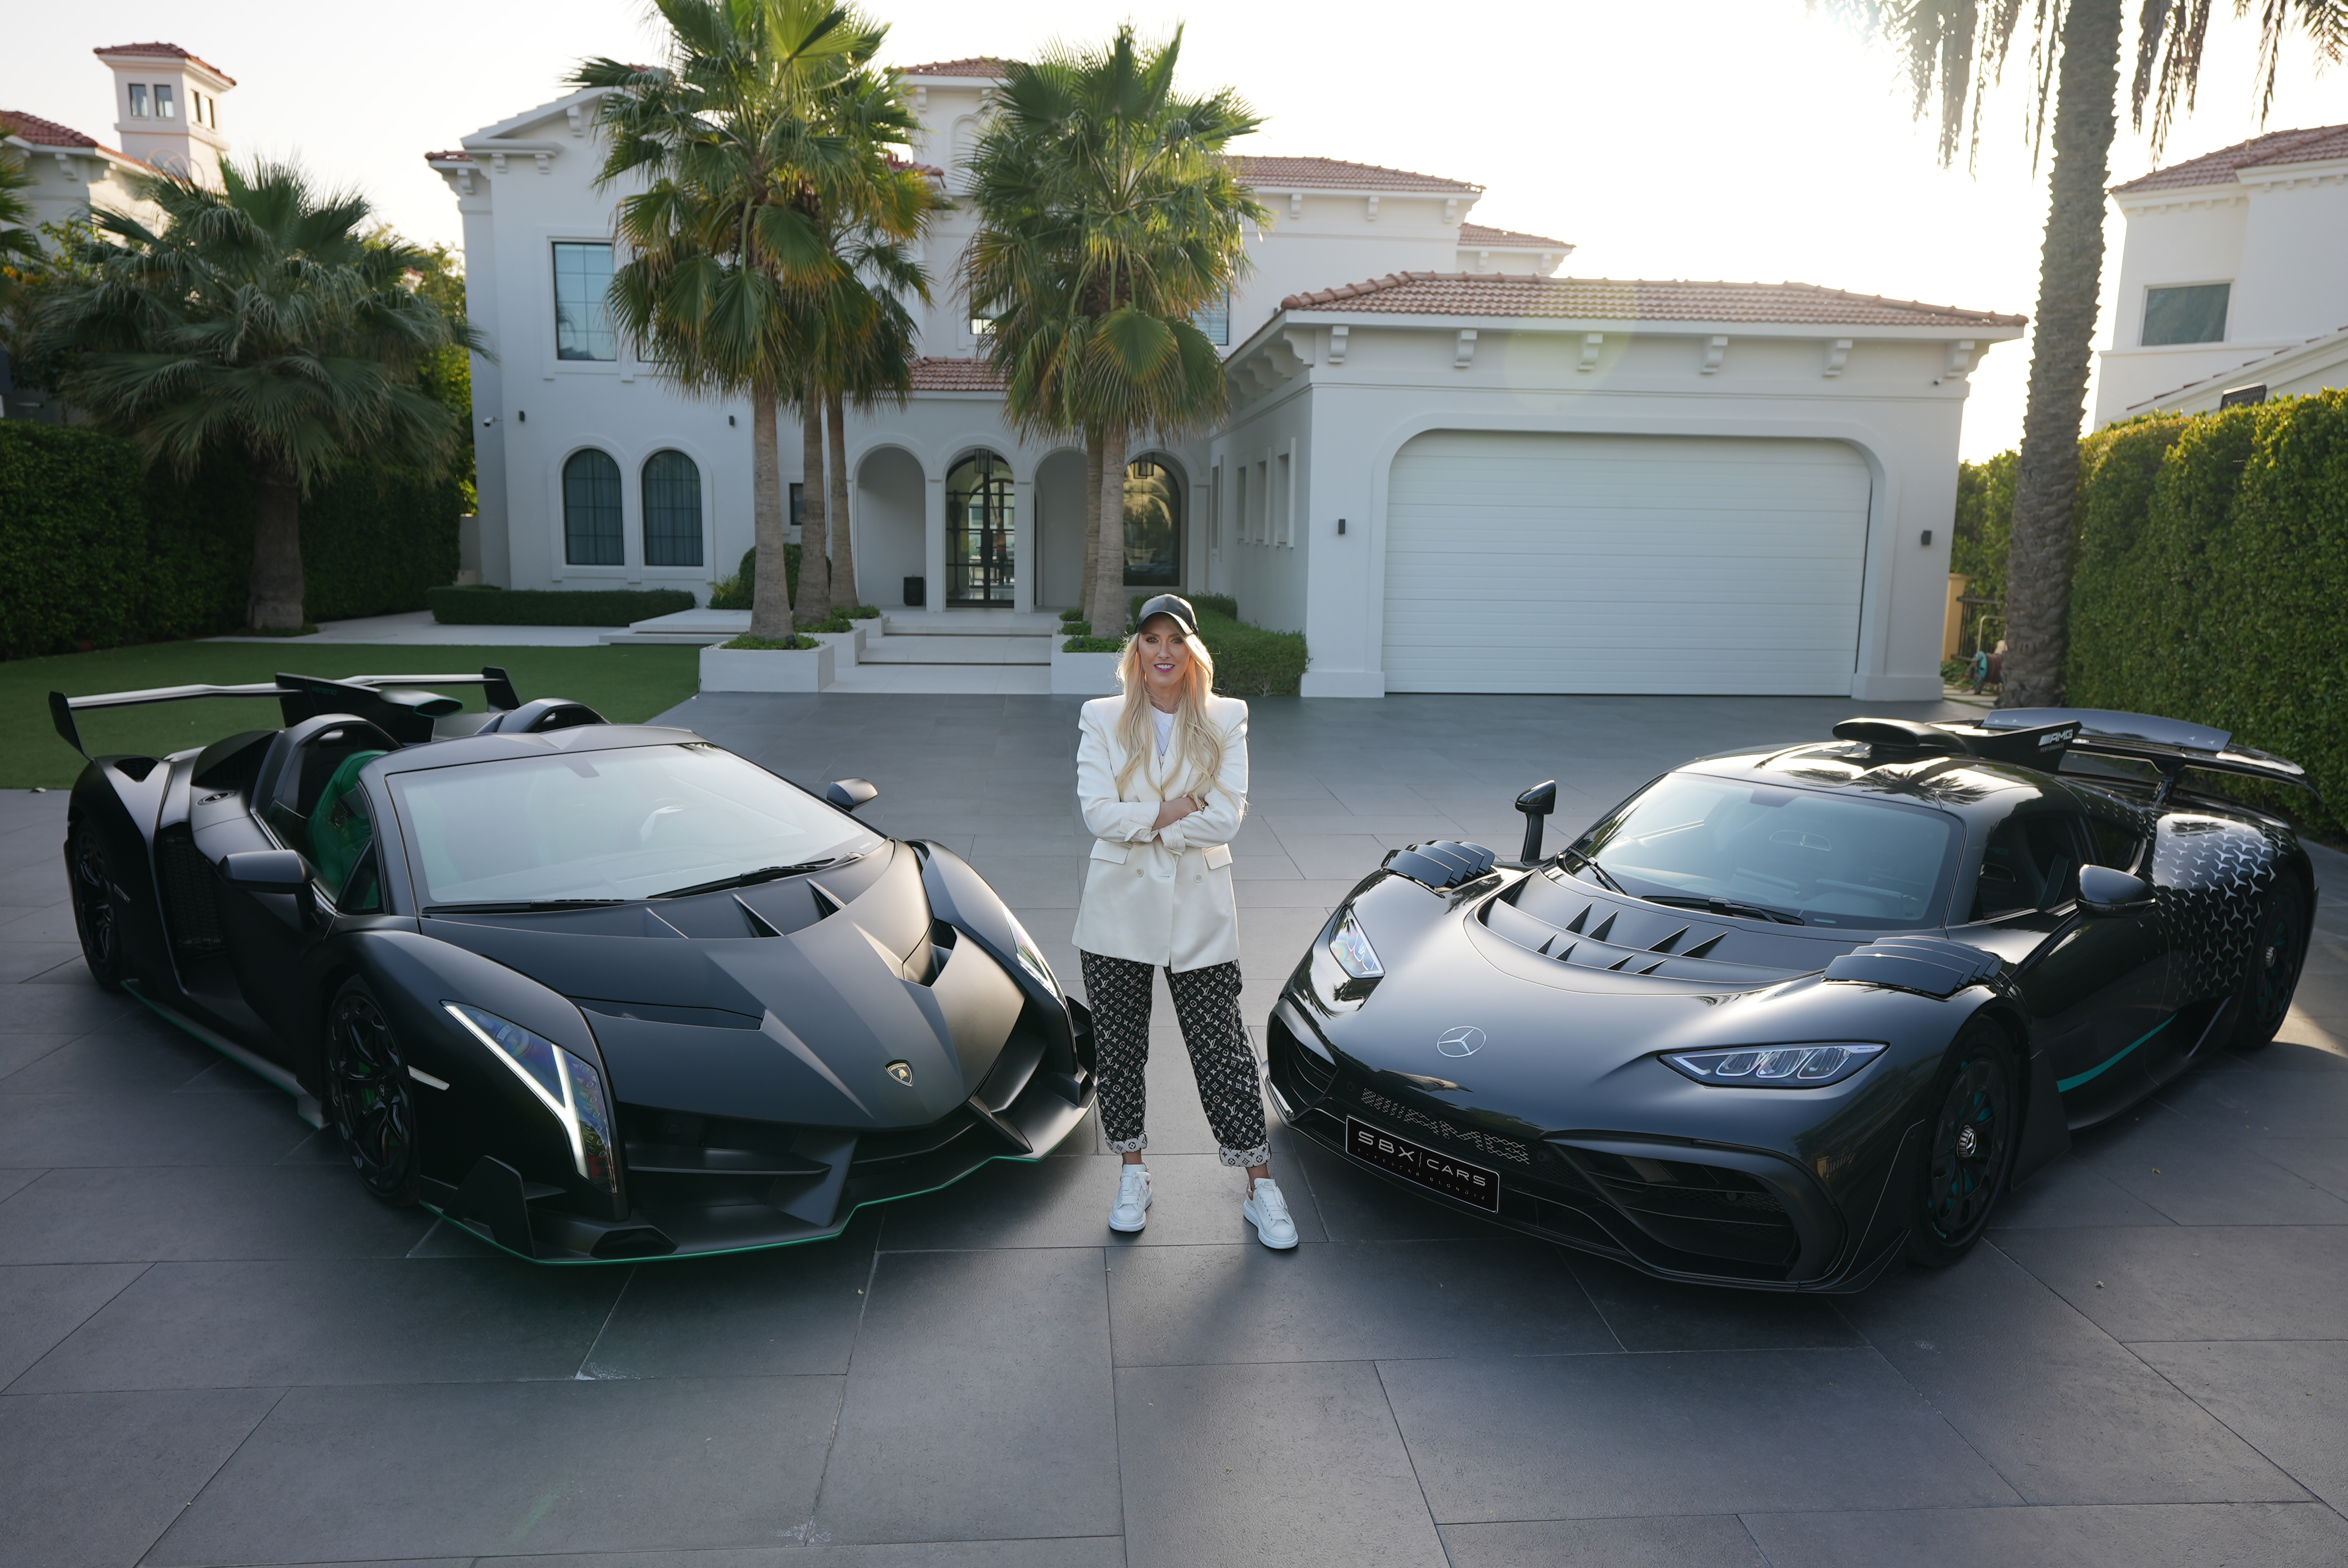 Her latest project is an exclusive online supercar auction platform